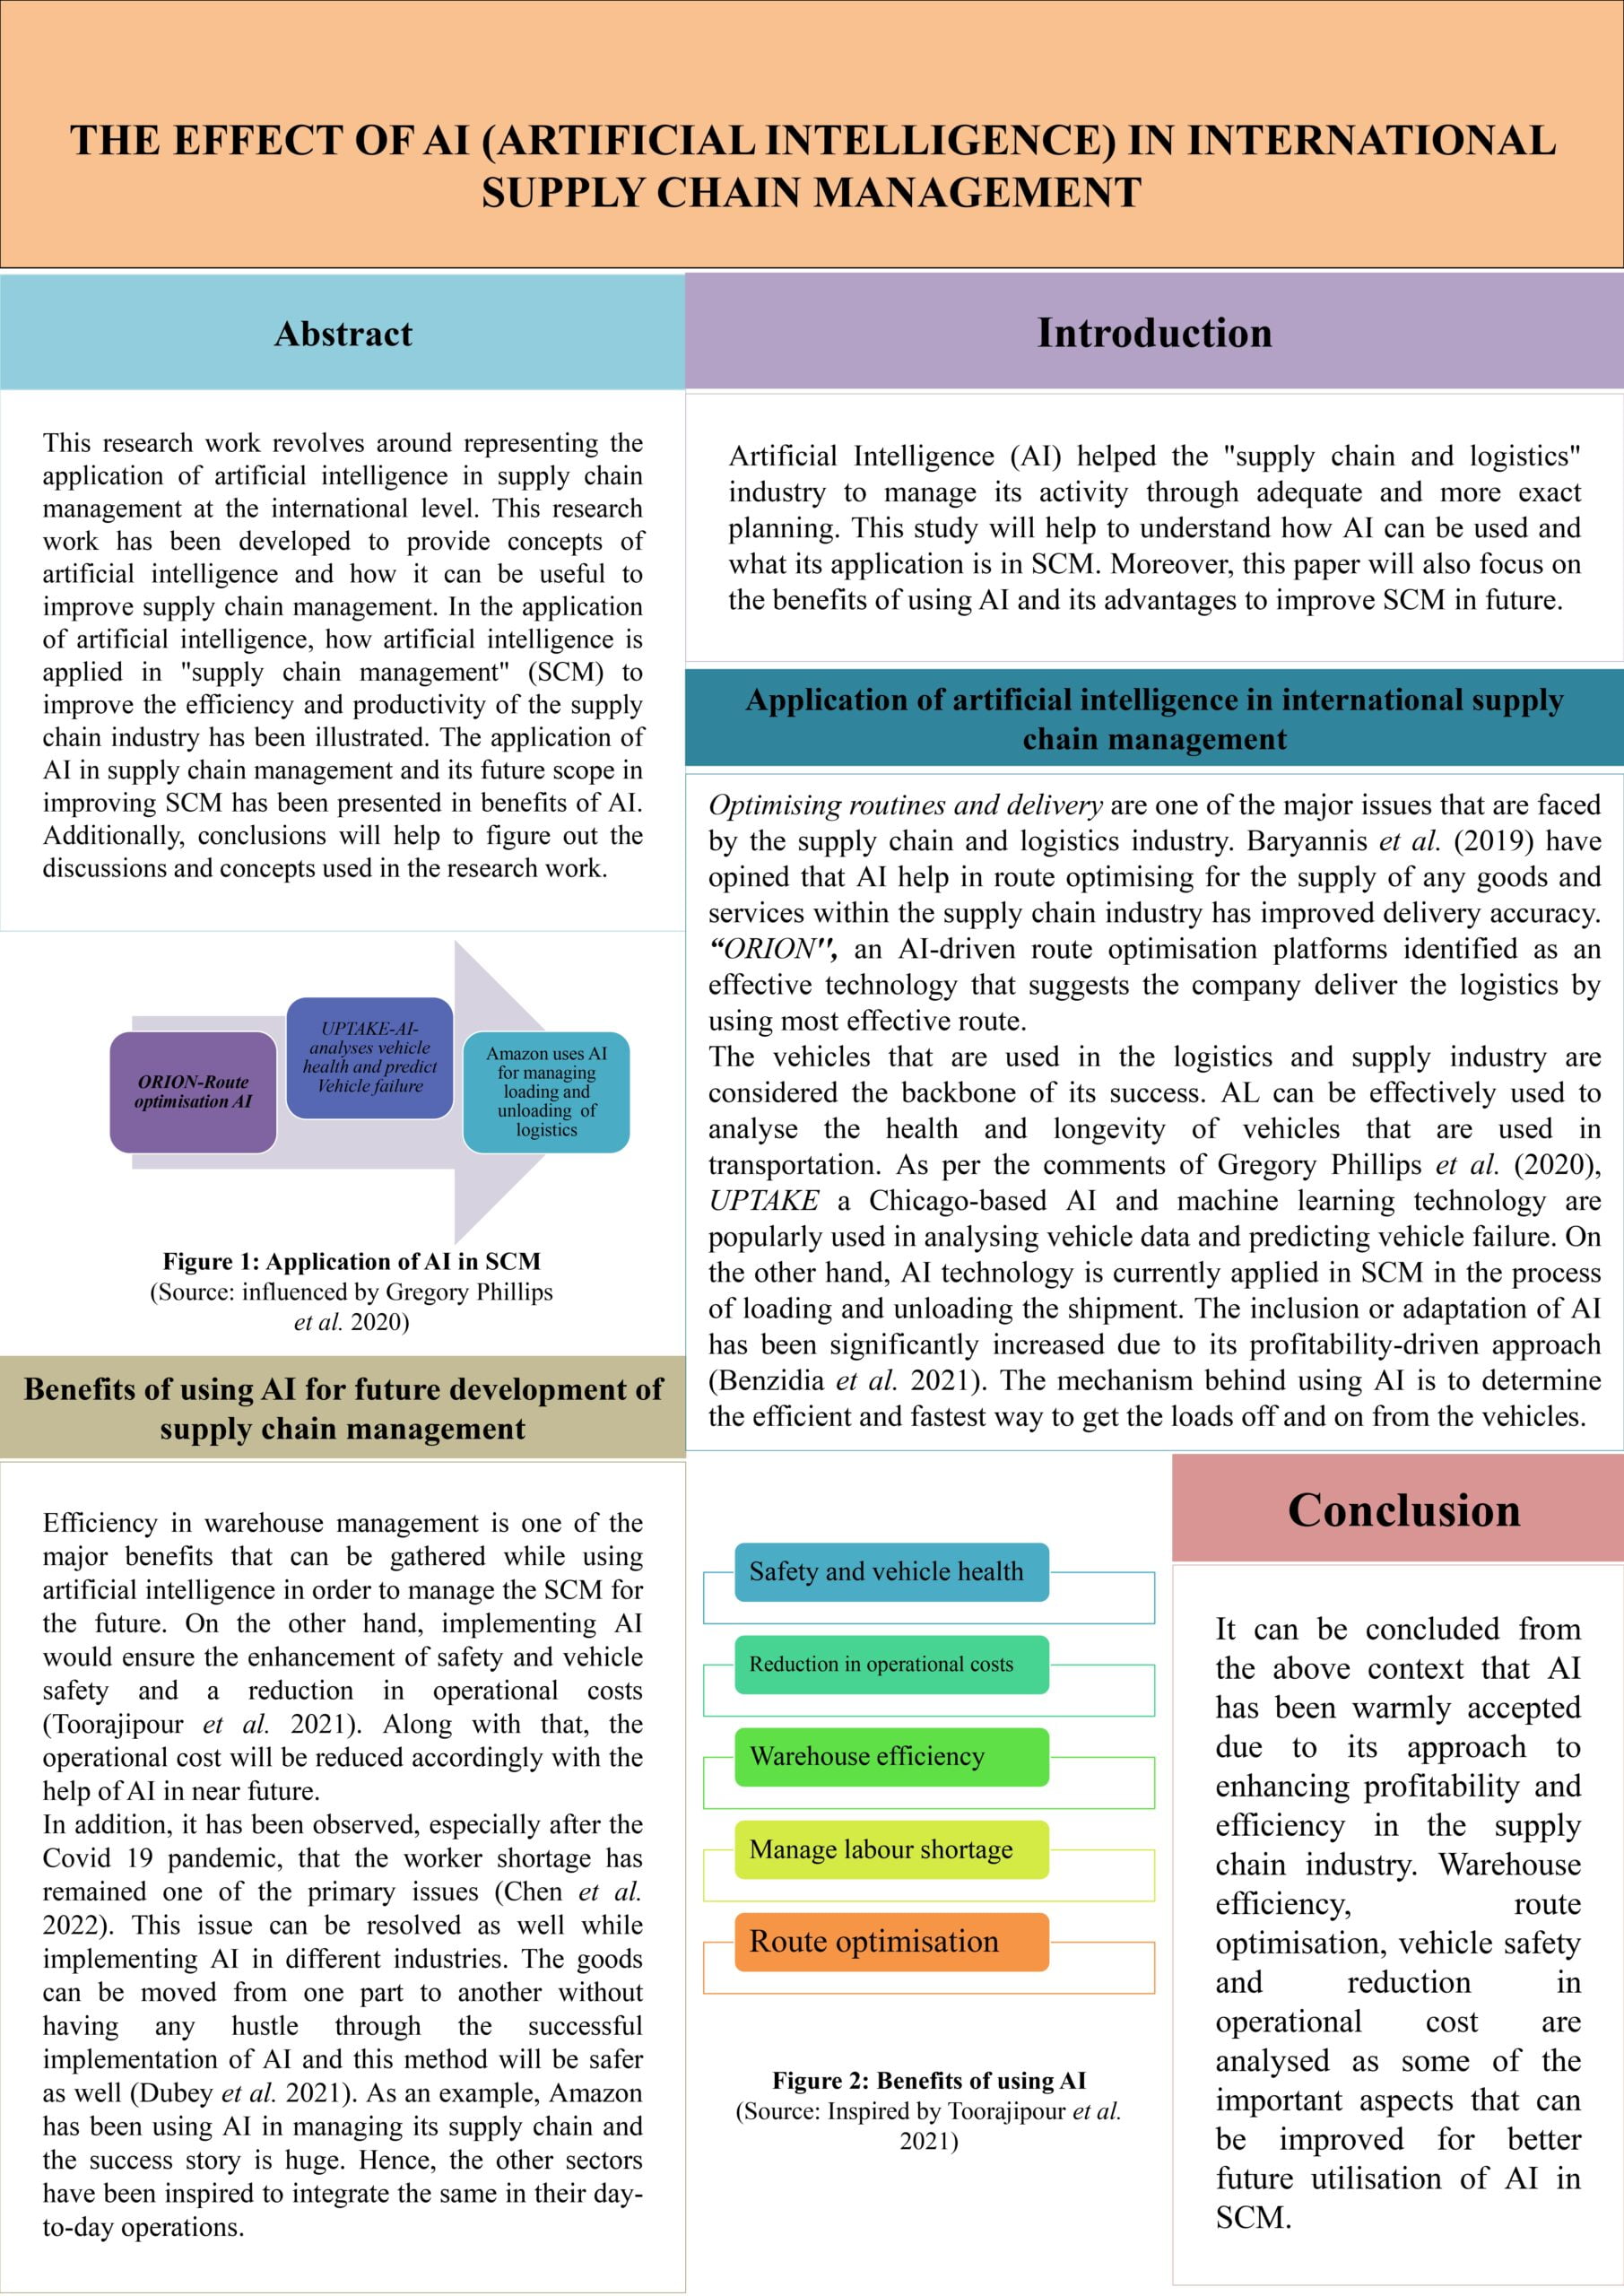 EFFECT OF AI IN INTERNATIONAL SUPPLY CHAIN MANAGEMENT | POSTER MAKING ASSIGNMENT